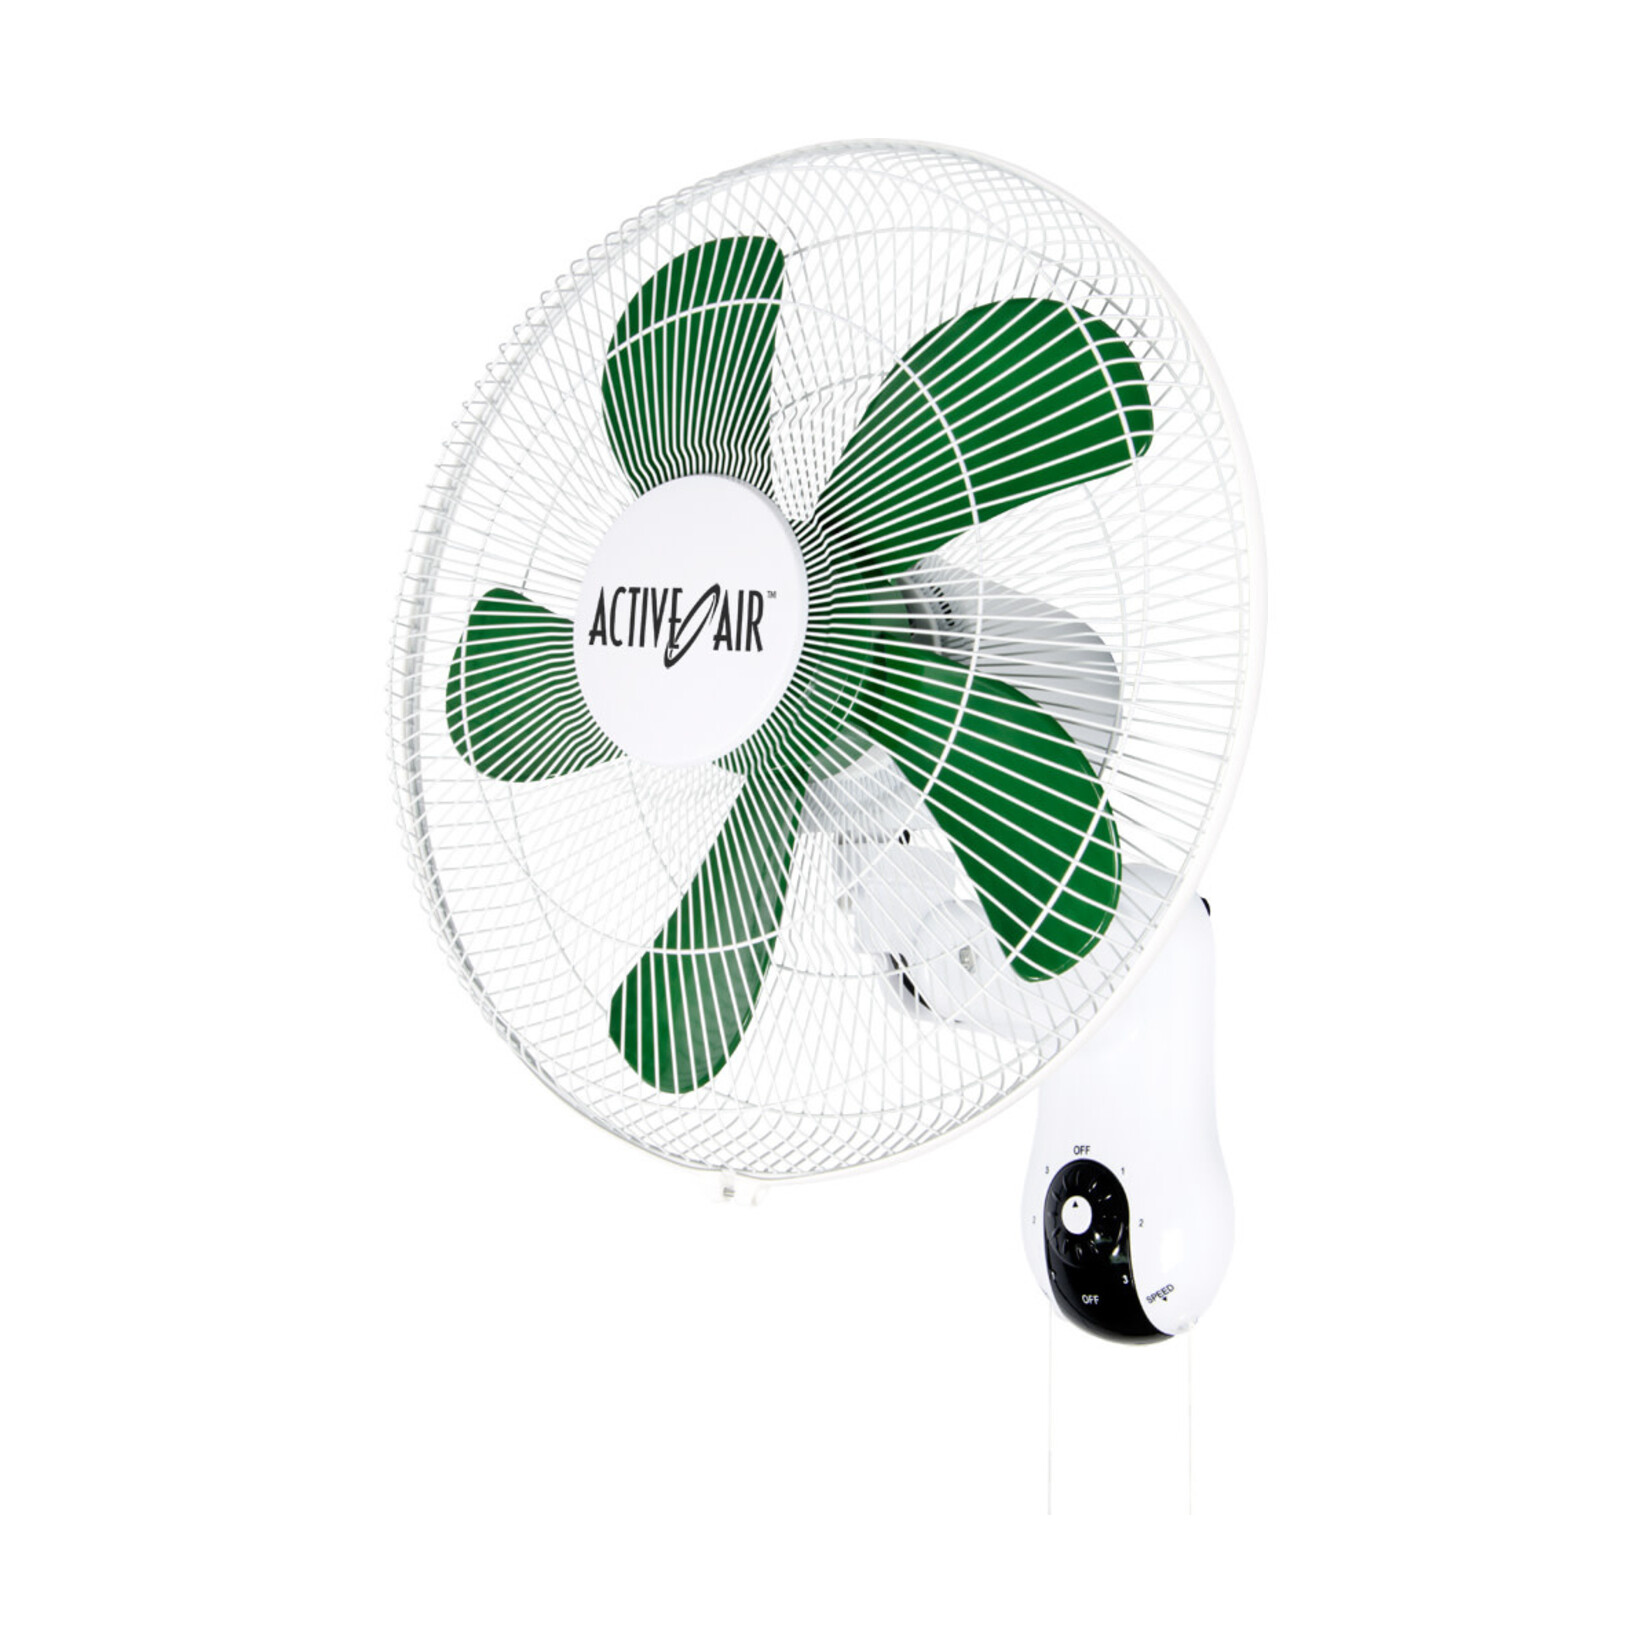 Active Air Active Air 16in Wall Mount Oscillating Fan